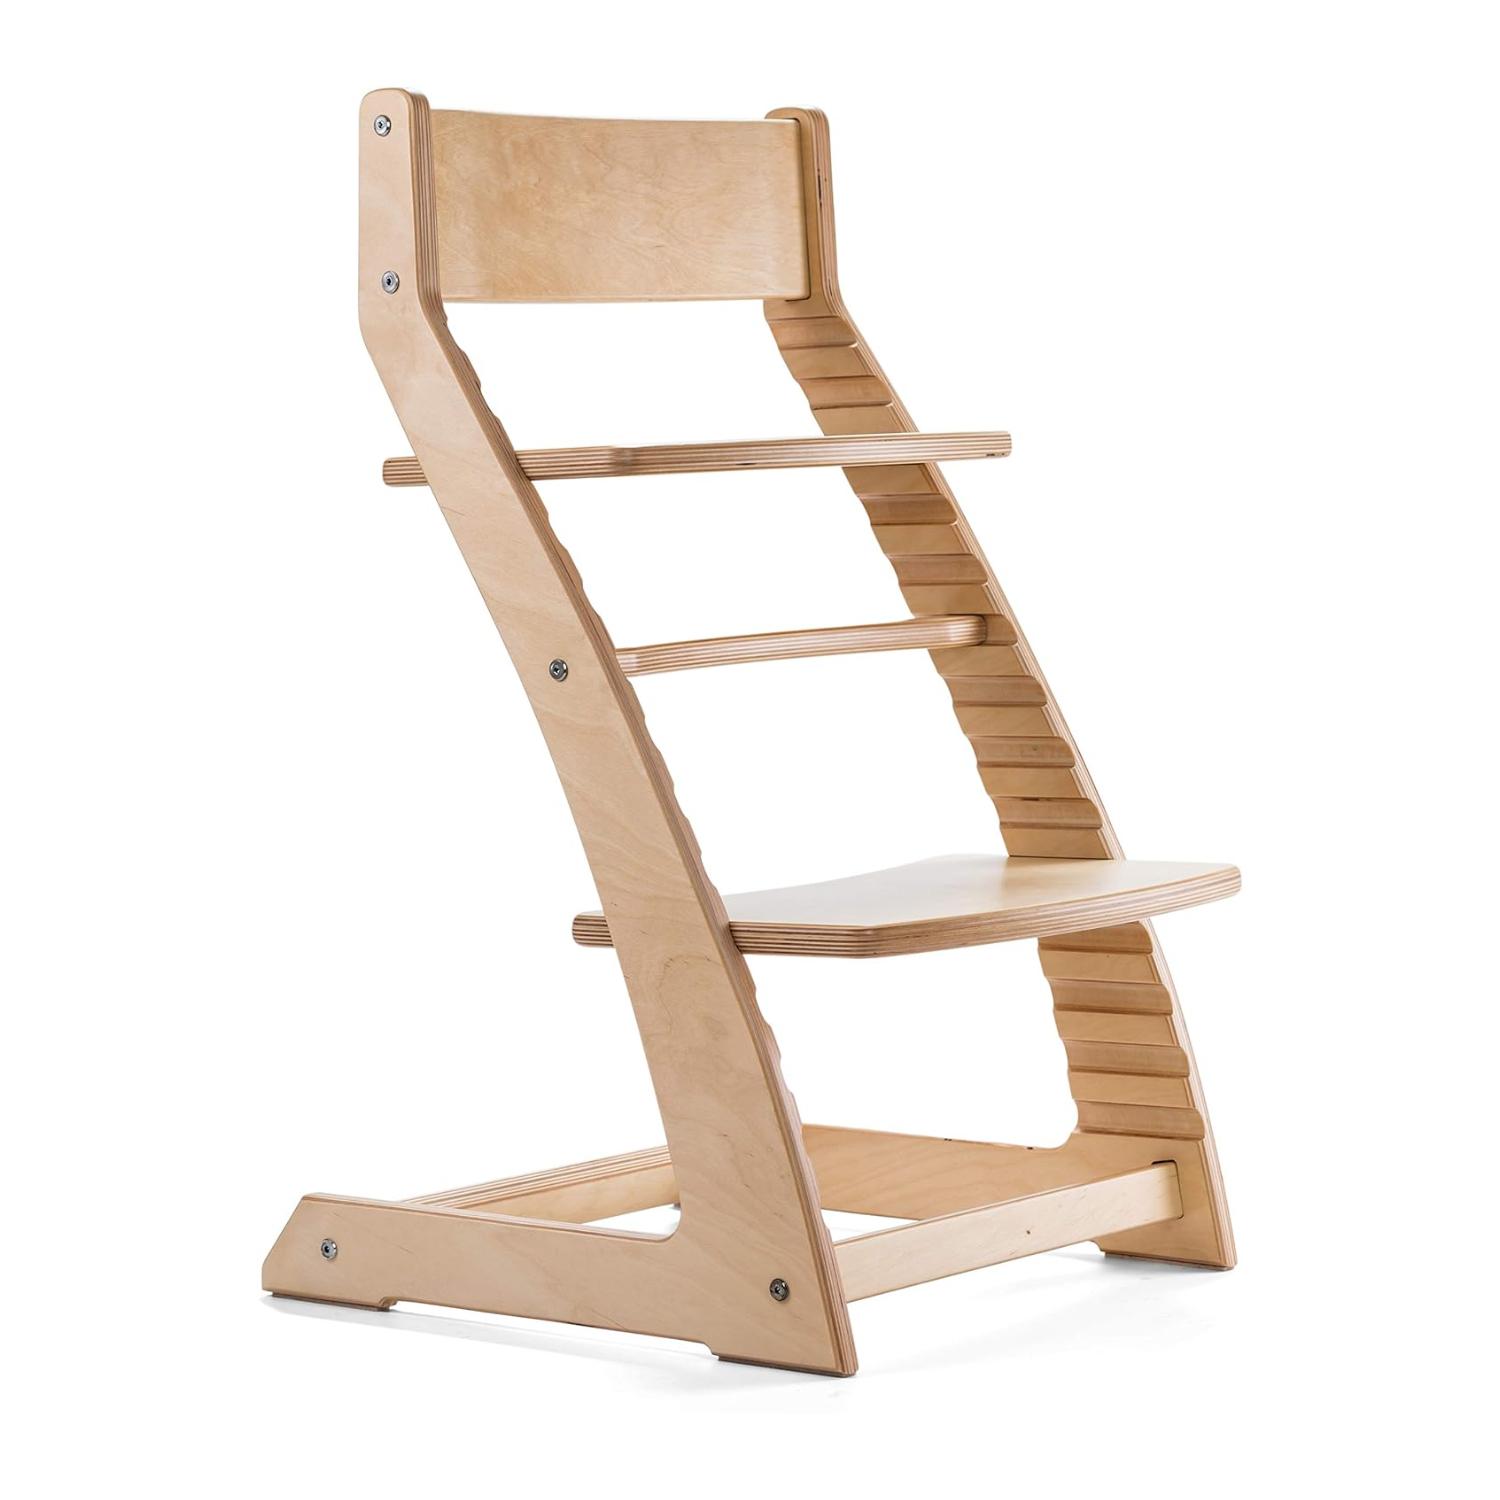 Montessori Fornel Heartwood Adjustable Wooden High Chair Natural